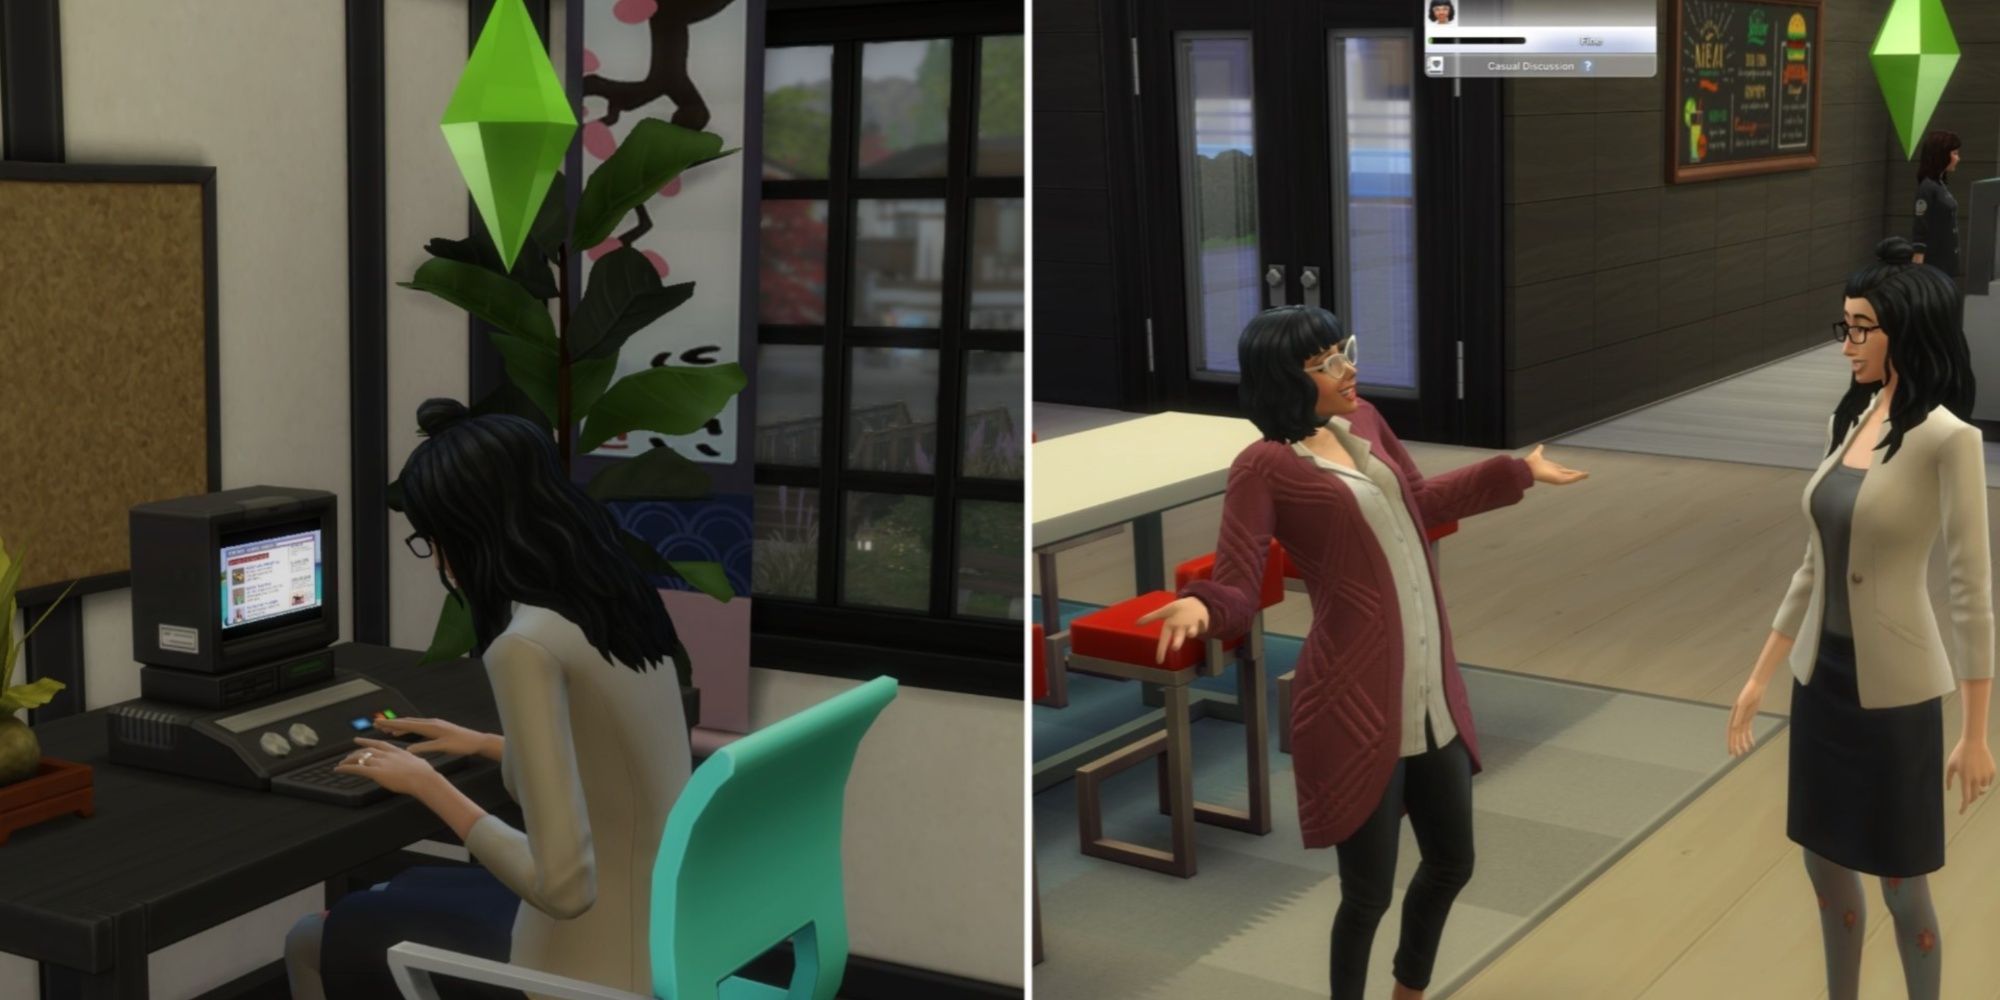 The Sims 4: A split image of a sim at a computer on the left and a sim speaking to another sim on the right